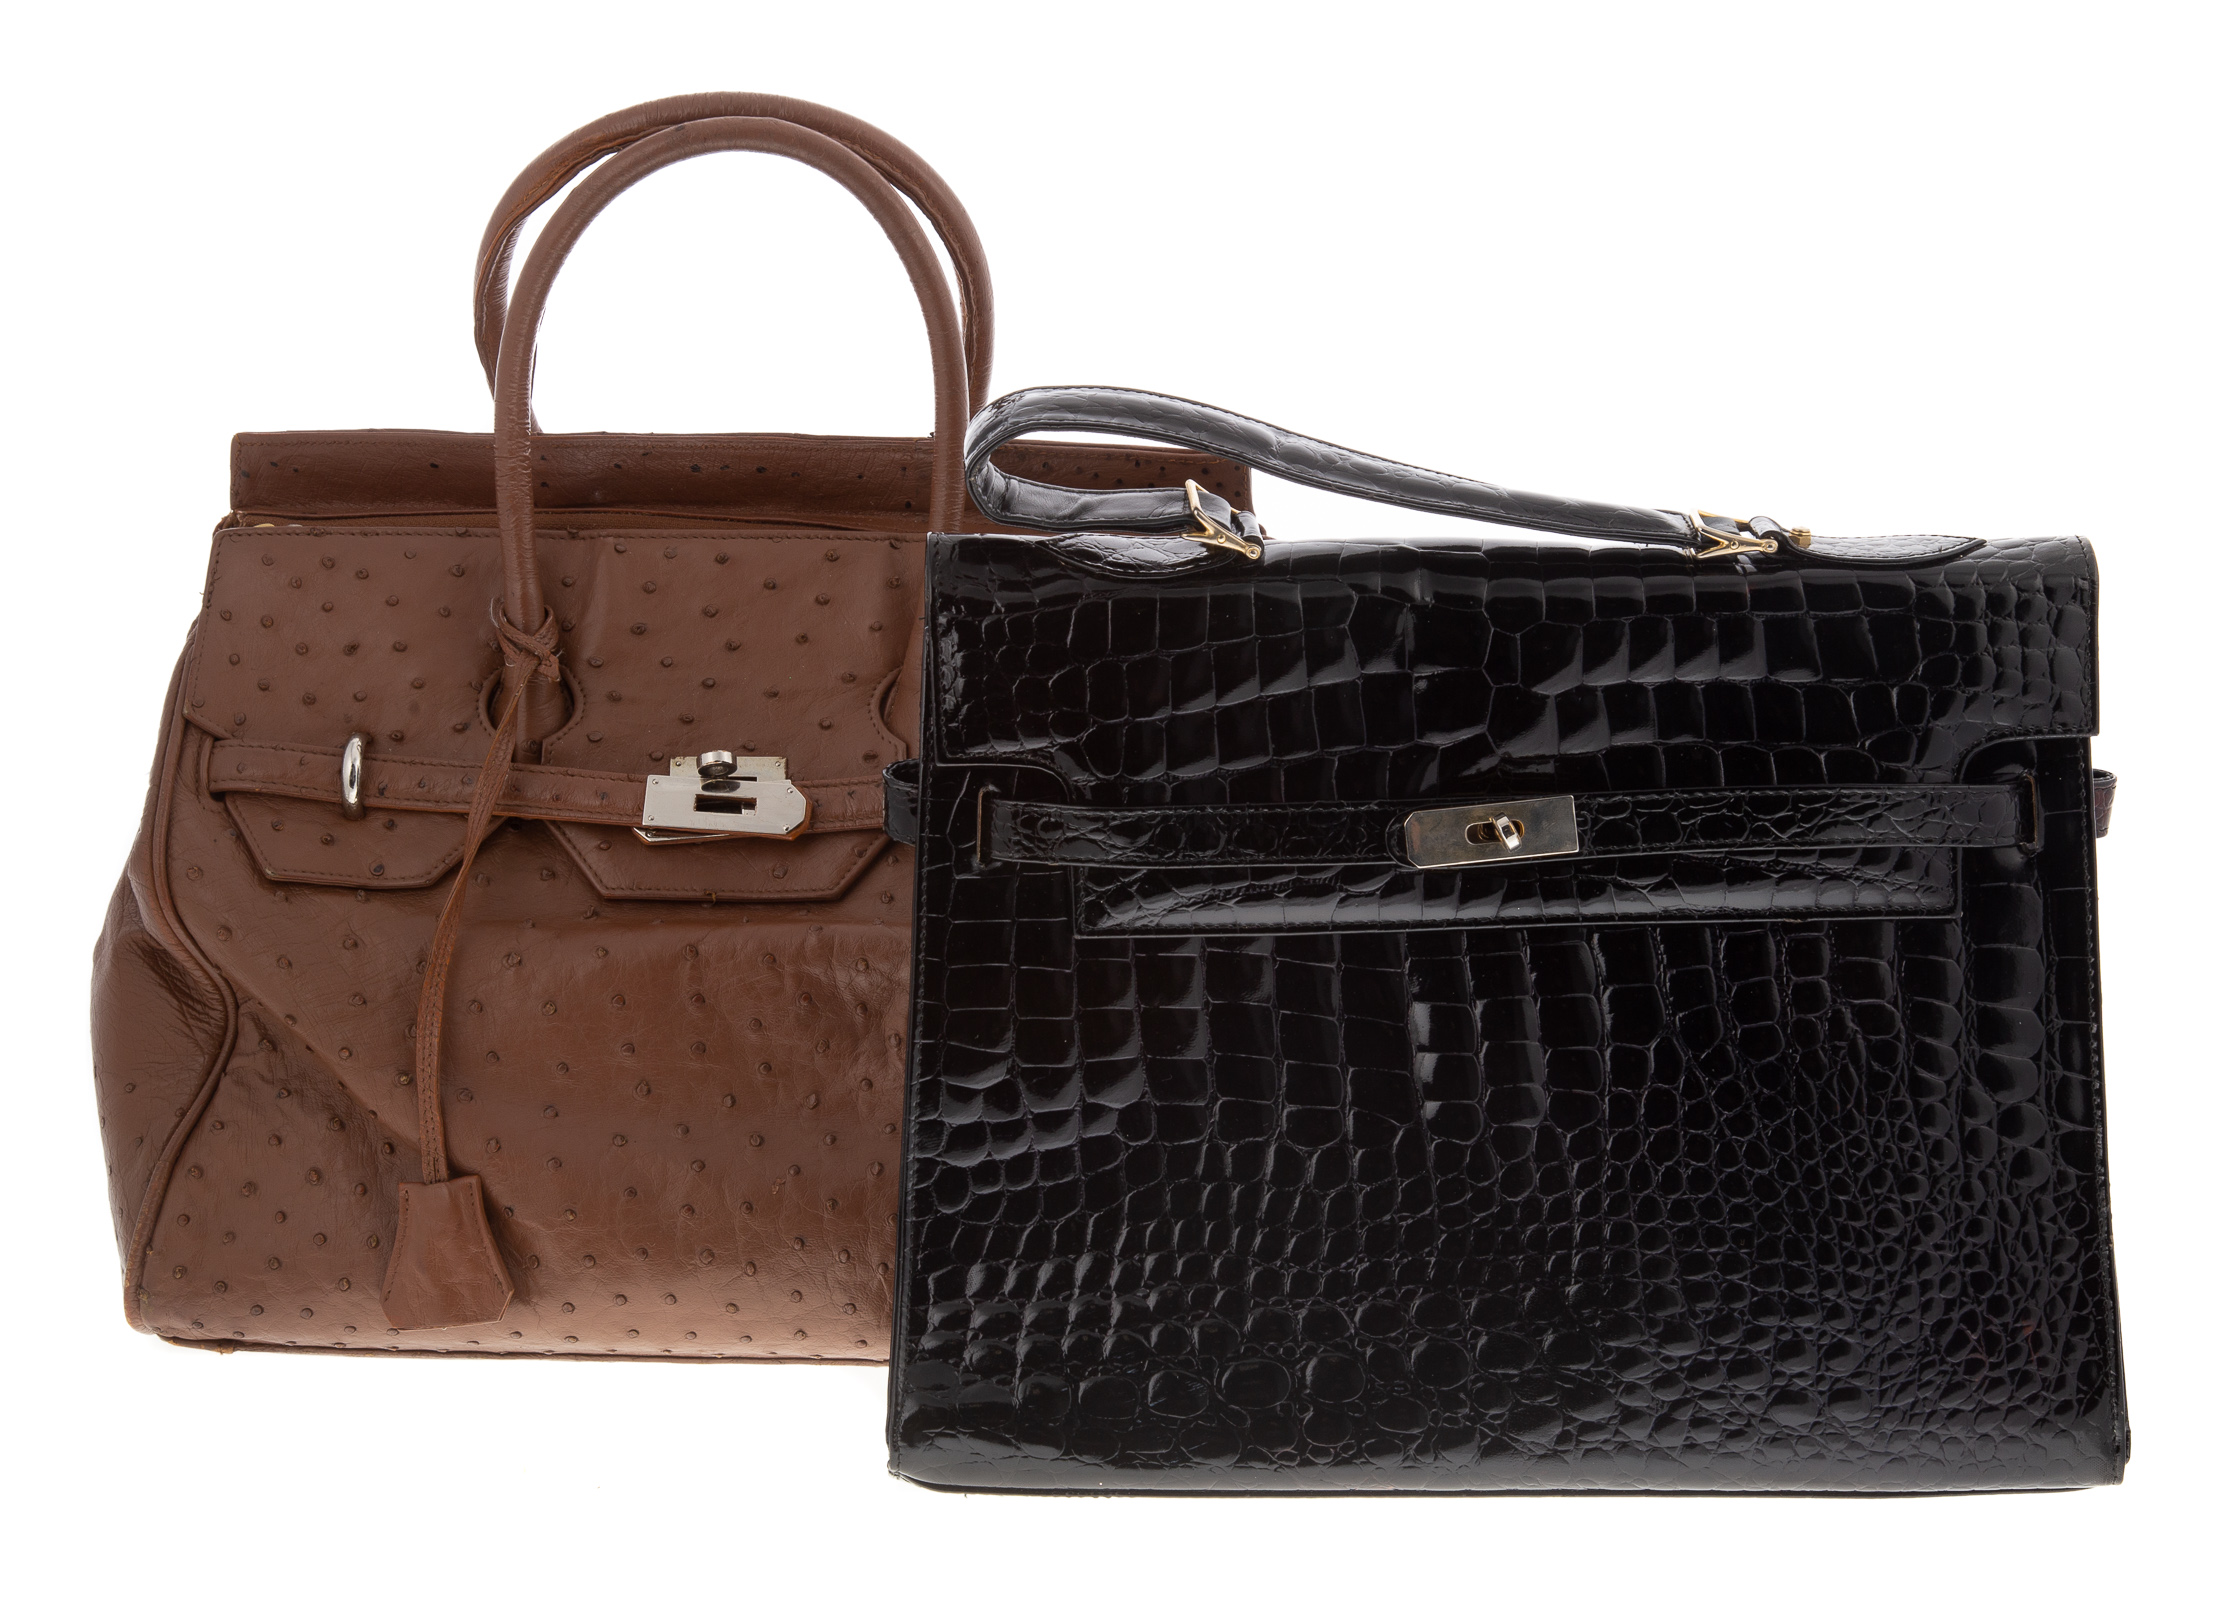 A LEATHER BIRKIN STYLE AND A KELLY STYLE 3373b5